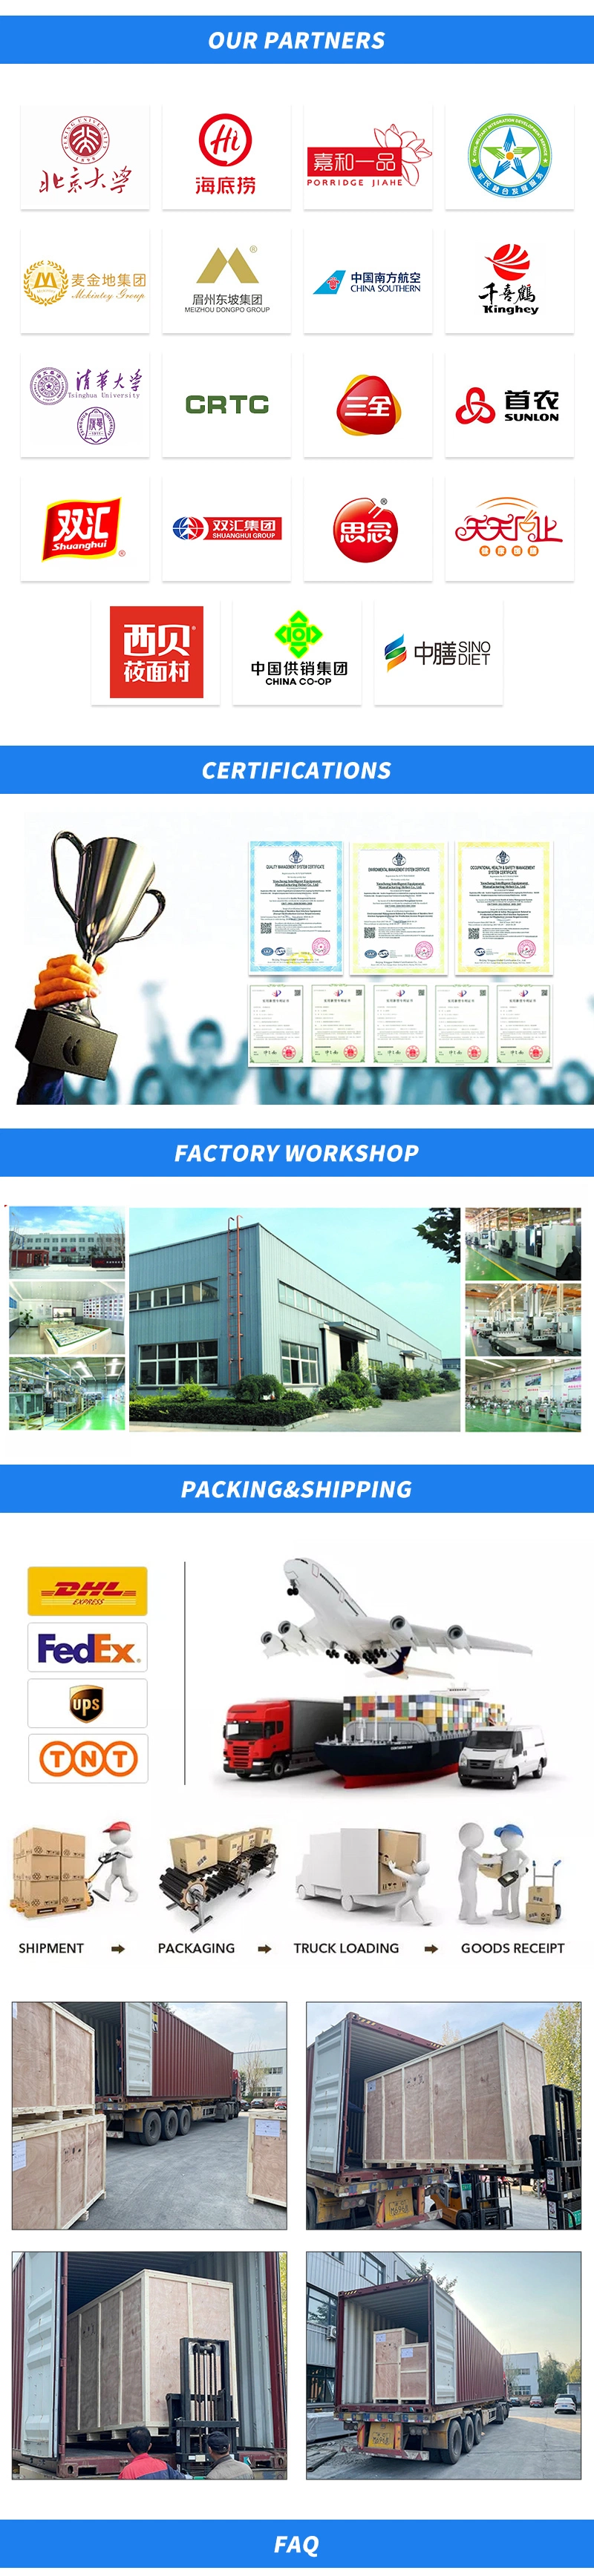 Bacon Sausage Meat Fish Food Packaging Thermoforming Vacuum Packaging Machine Automatic